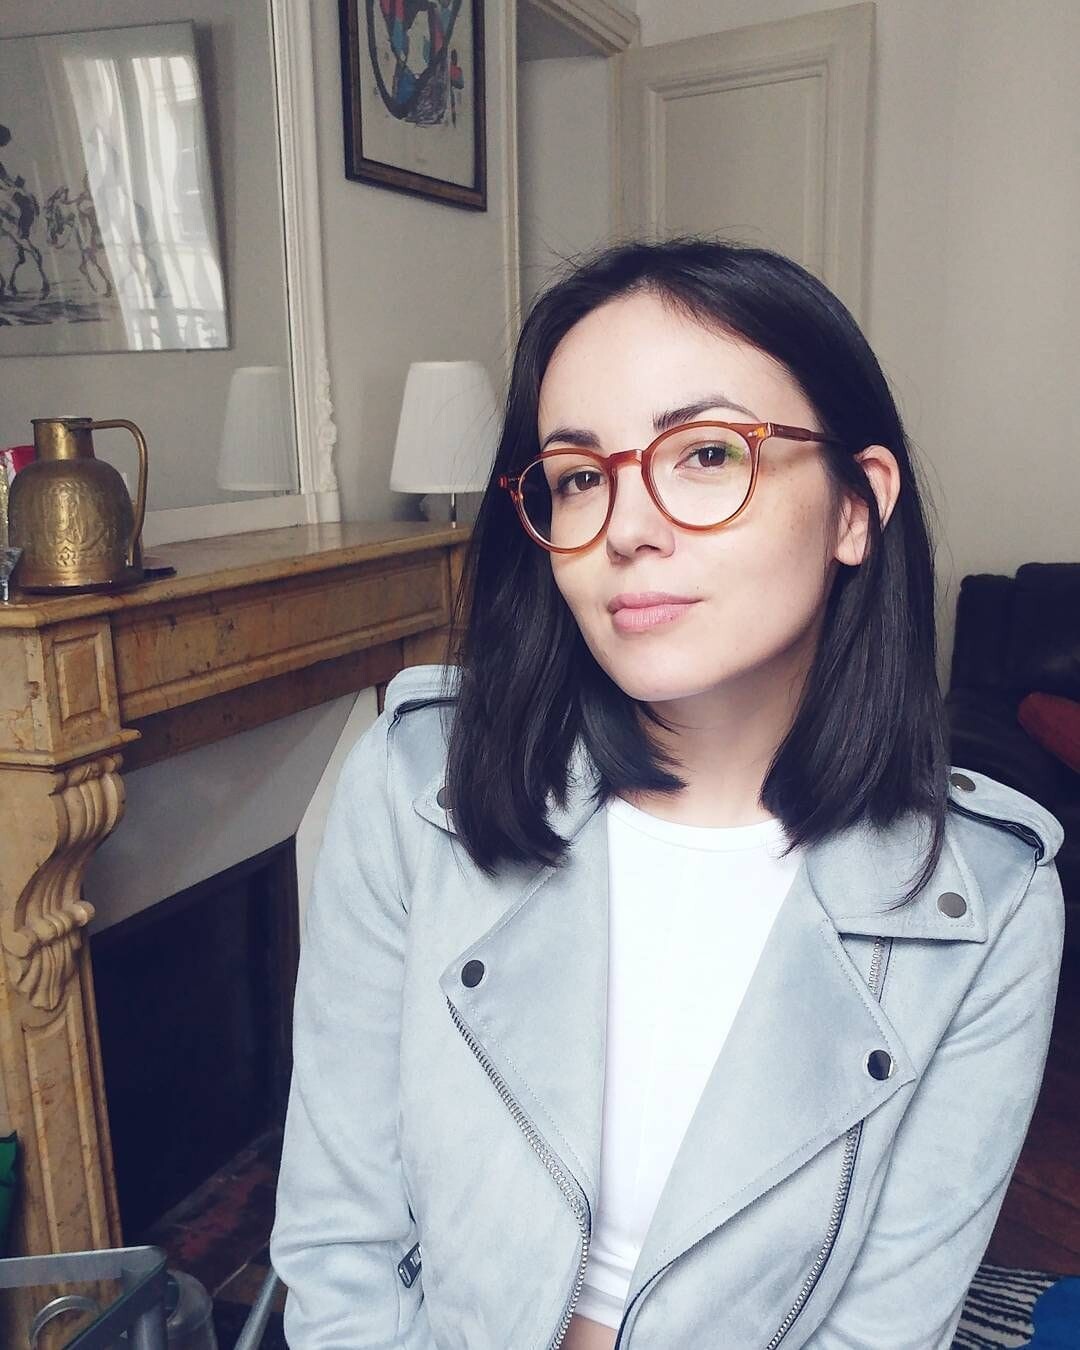 Agathe Auproux - Other Females of Interest - Bellazon